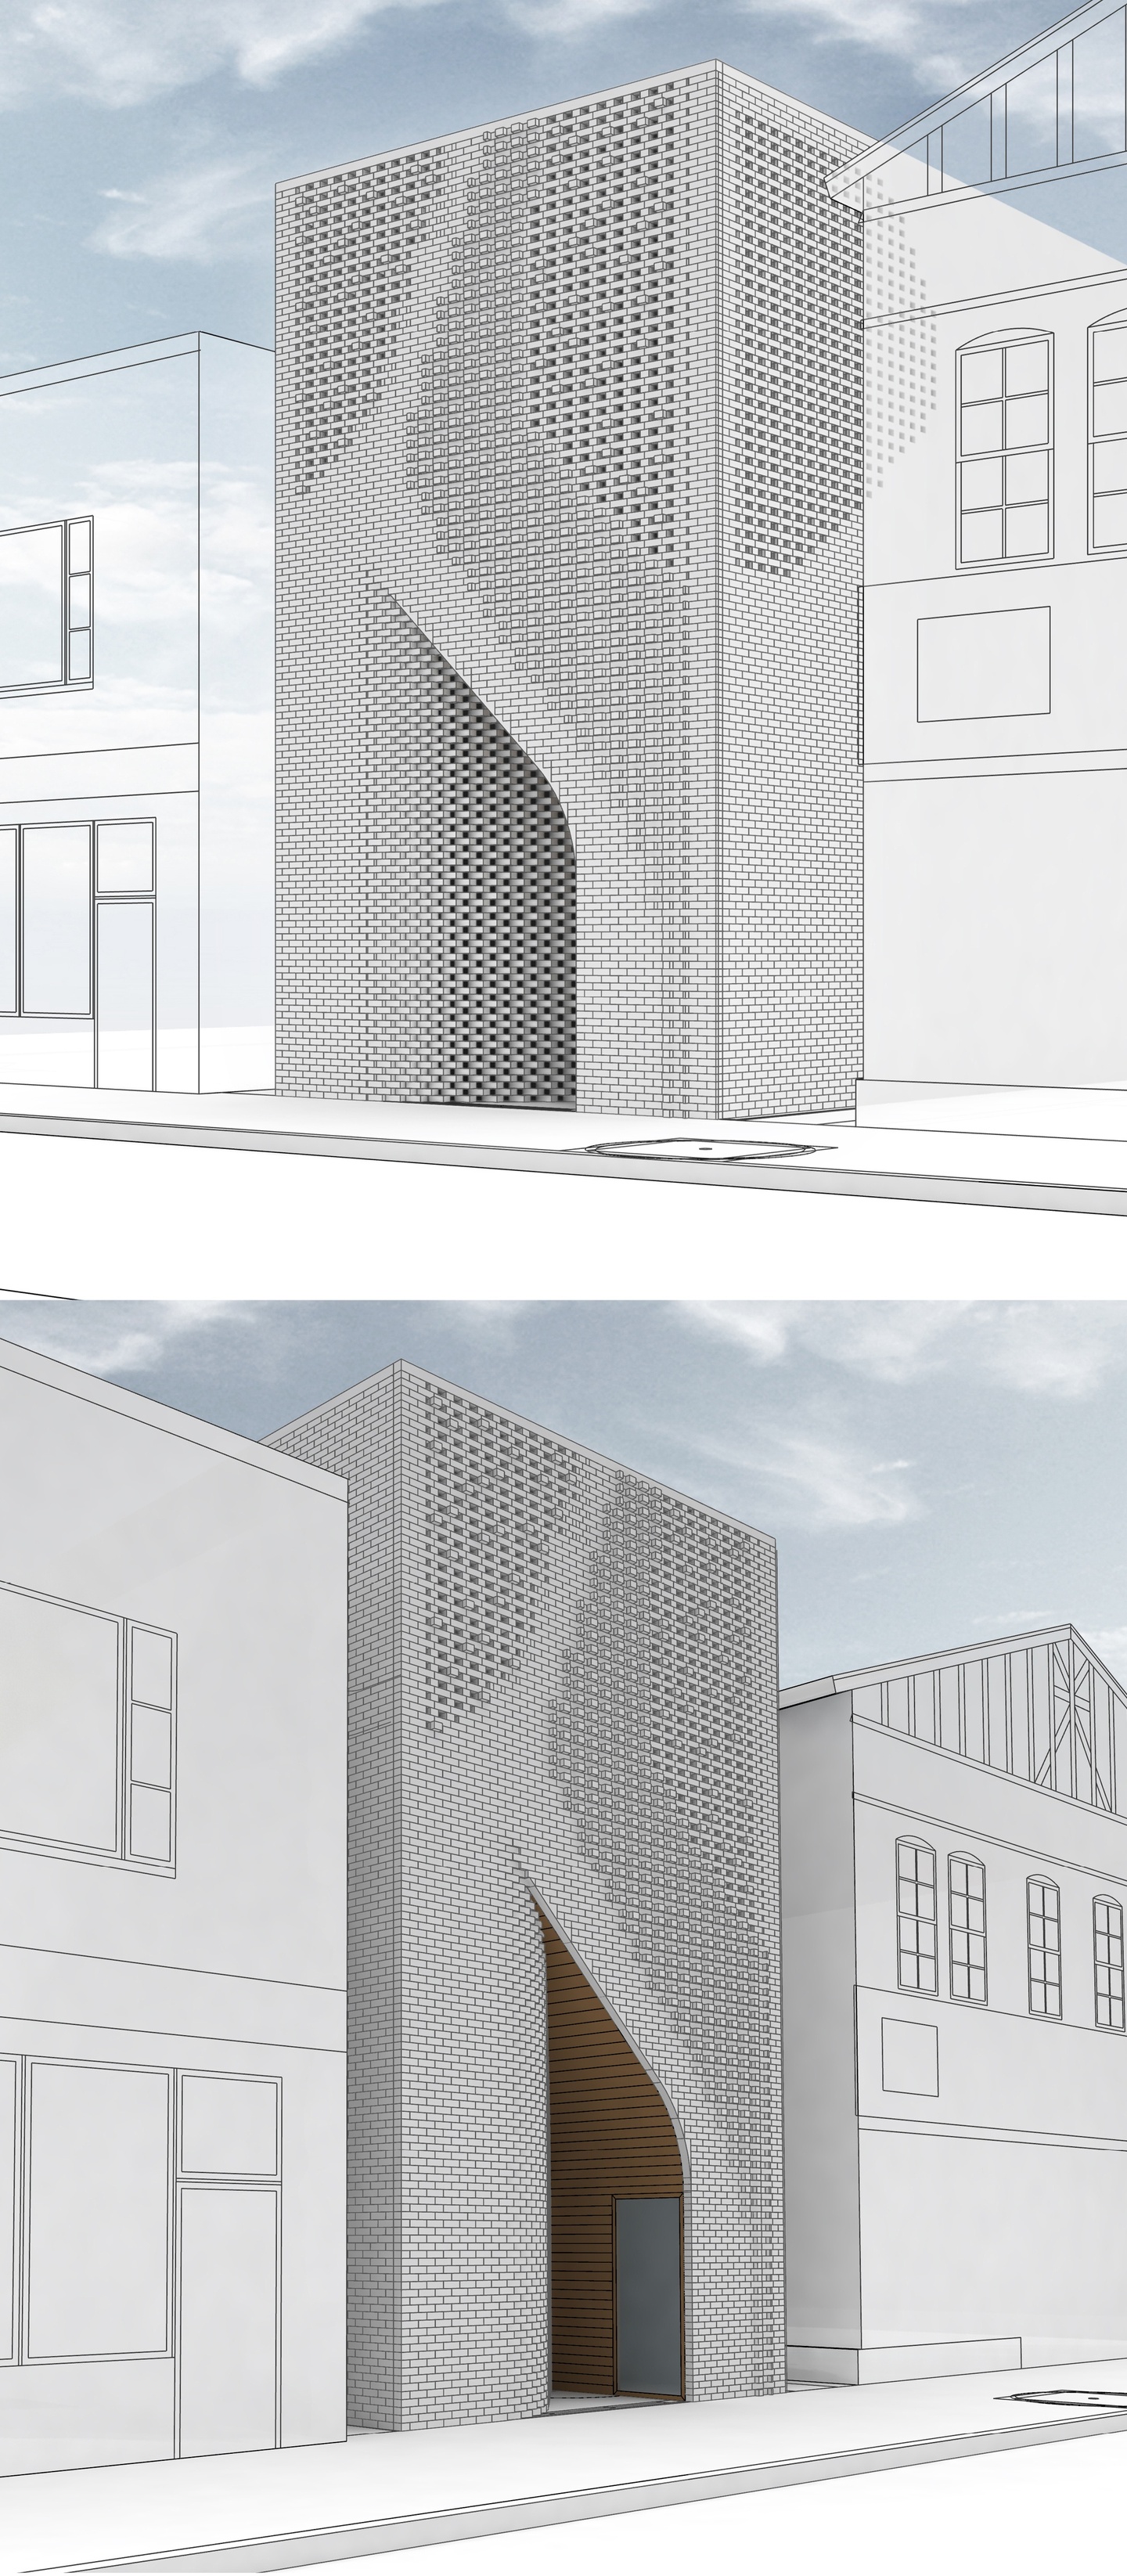 Two perspectives of the same facade along the street showing perforations and an entry